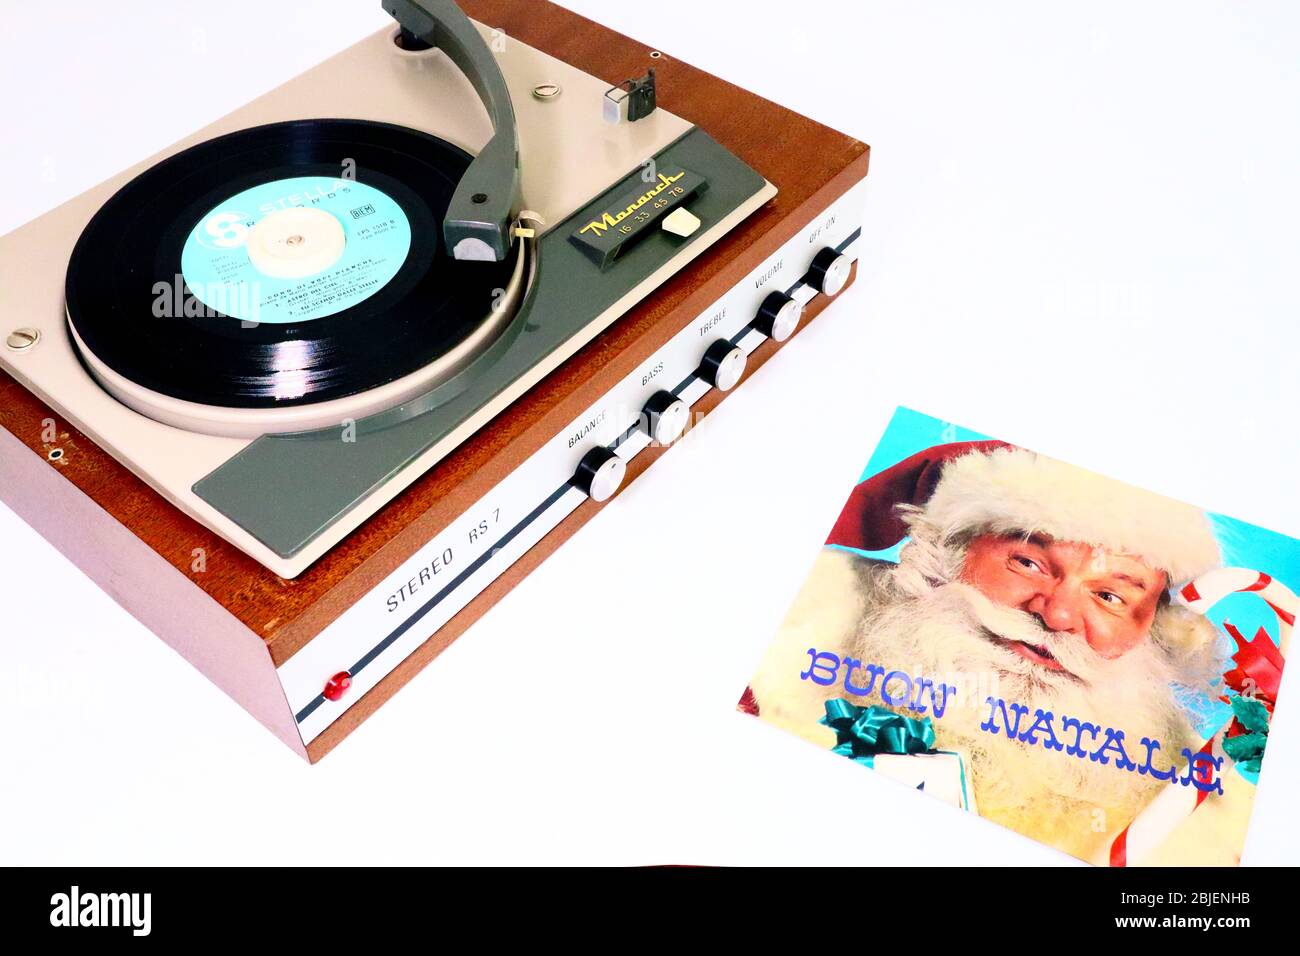 Buon Natale Song.Buon Natale Christmas Songs Vintage Vinyl Record On 1966 Monarch Record Player Stock Photo Alamy